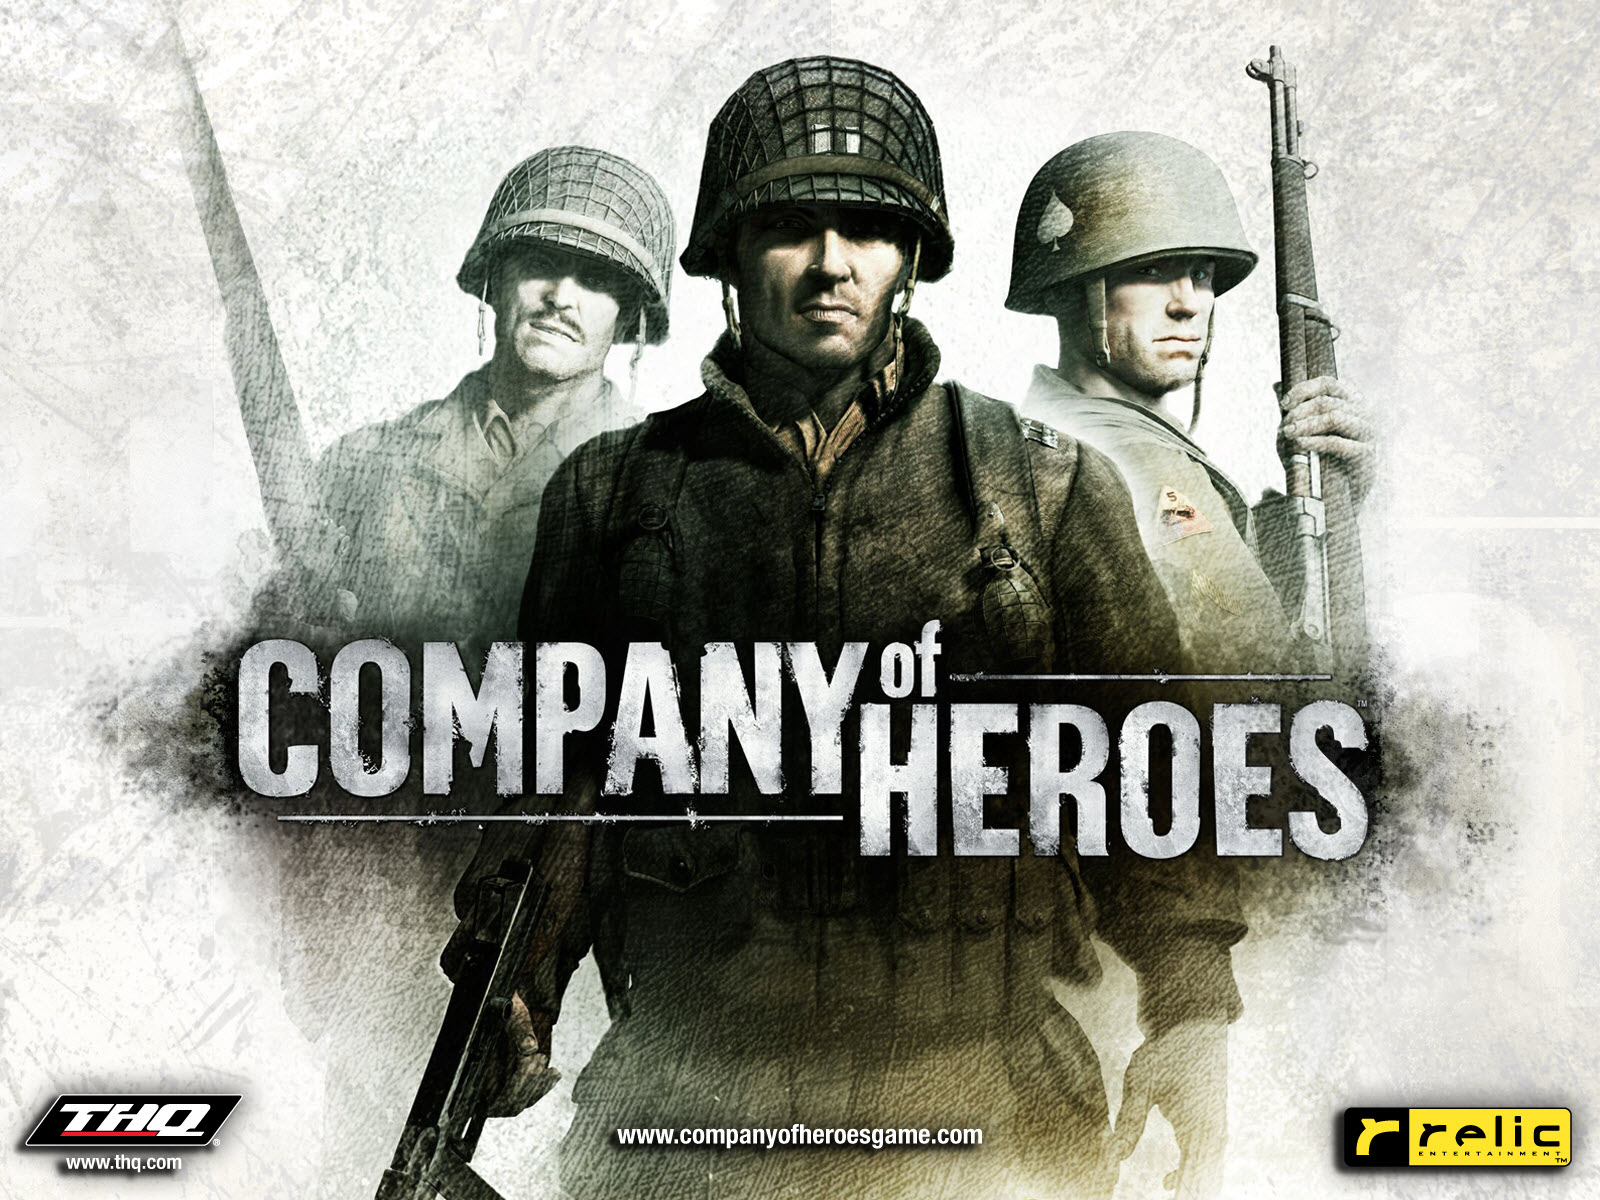 Company Of Heroes Wallpapers - Wallpaper, High Definition, High Quality